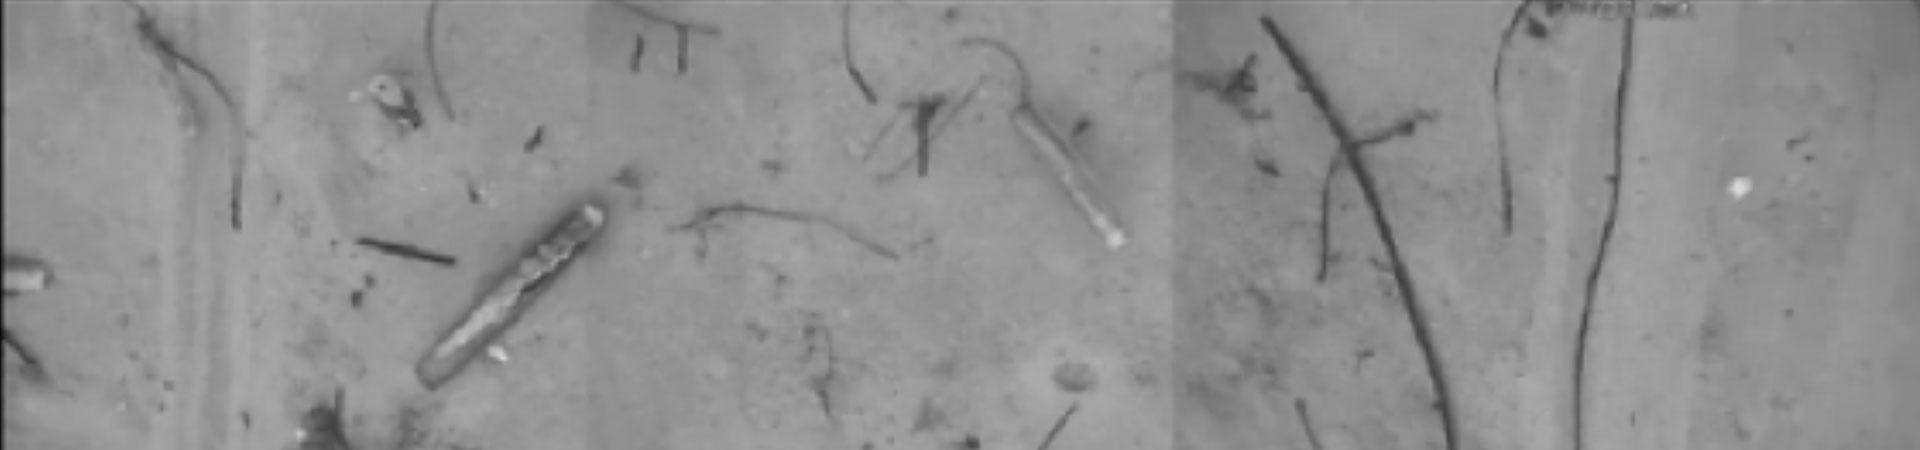 Still from video of seabed showing razor clams emerging in response to electrofishing. Total image width = 1.5 m